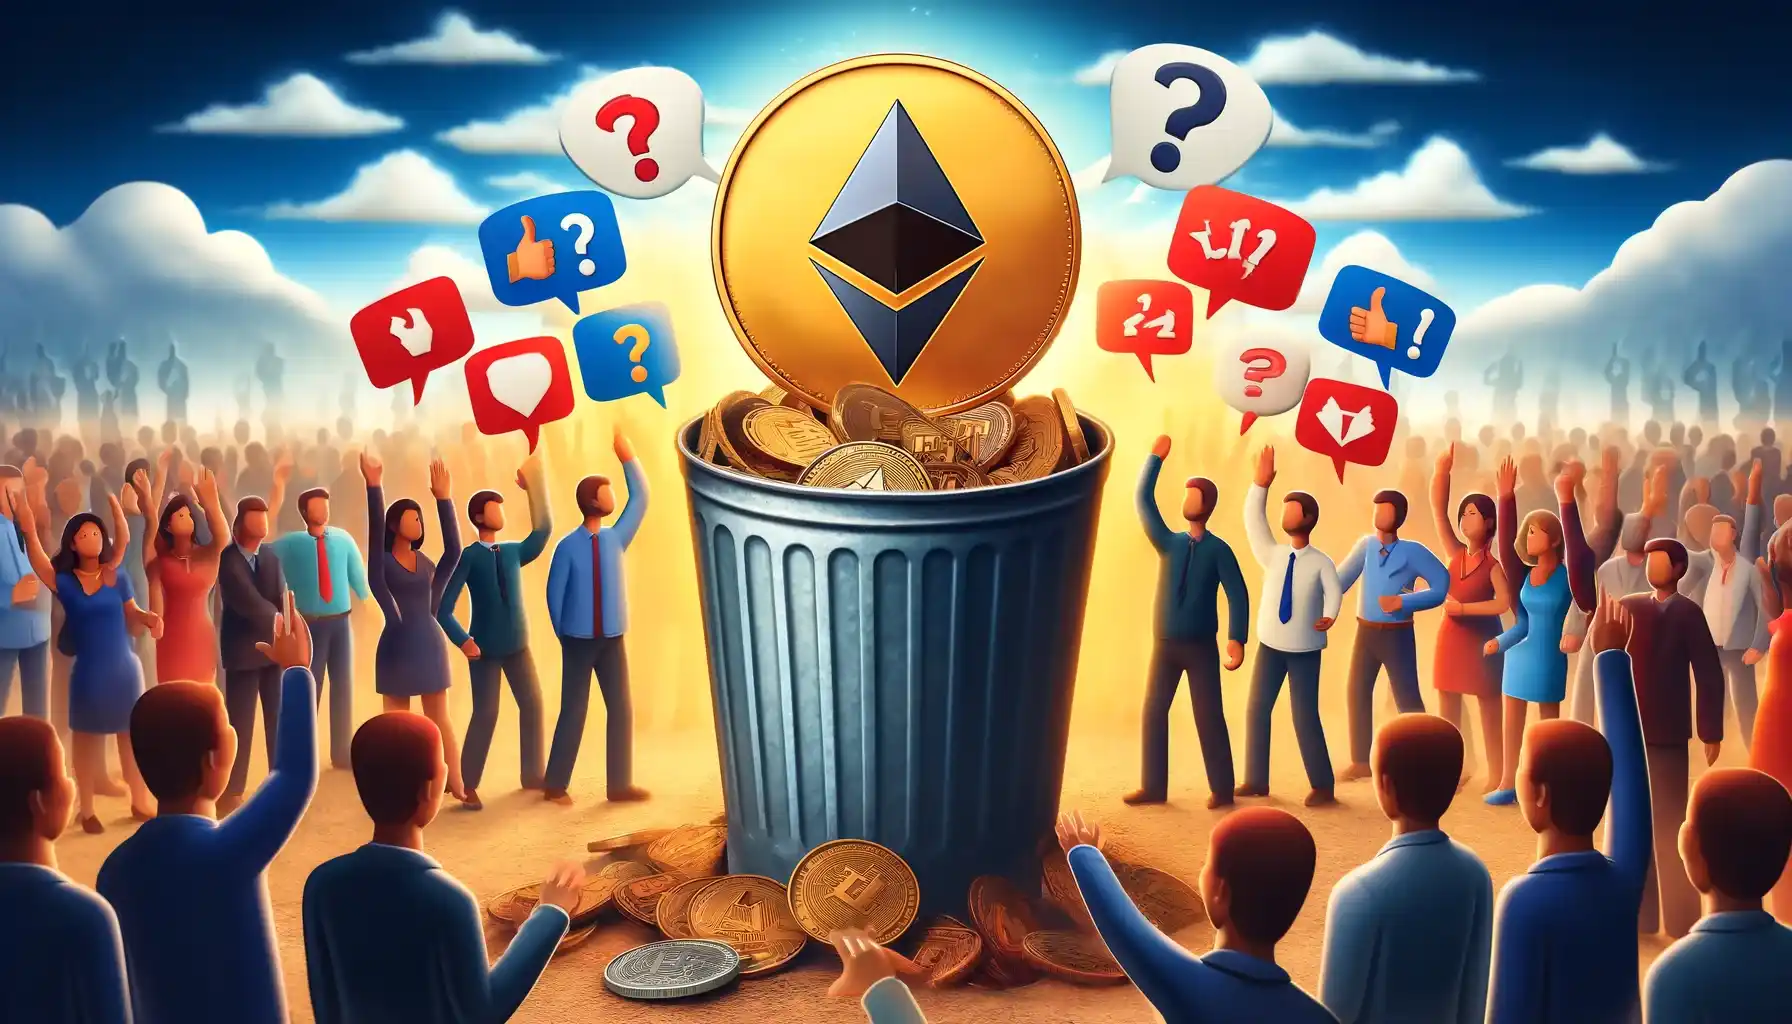 Ethereum: Analyst claims ‘junk coin’ ETH is ‘Bitcoin pretender’ despite ‘Etheridiots’